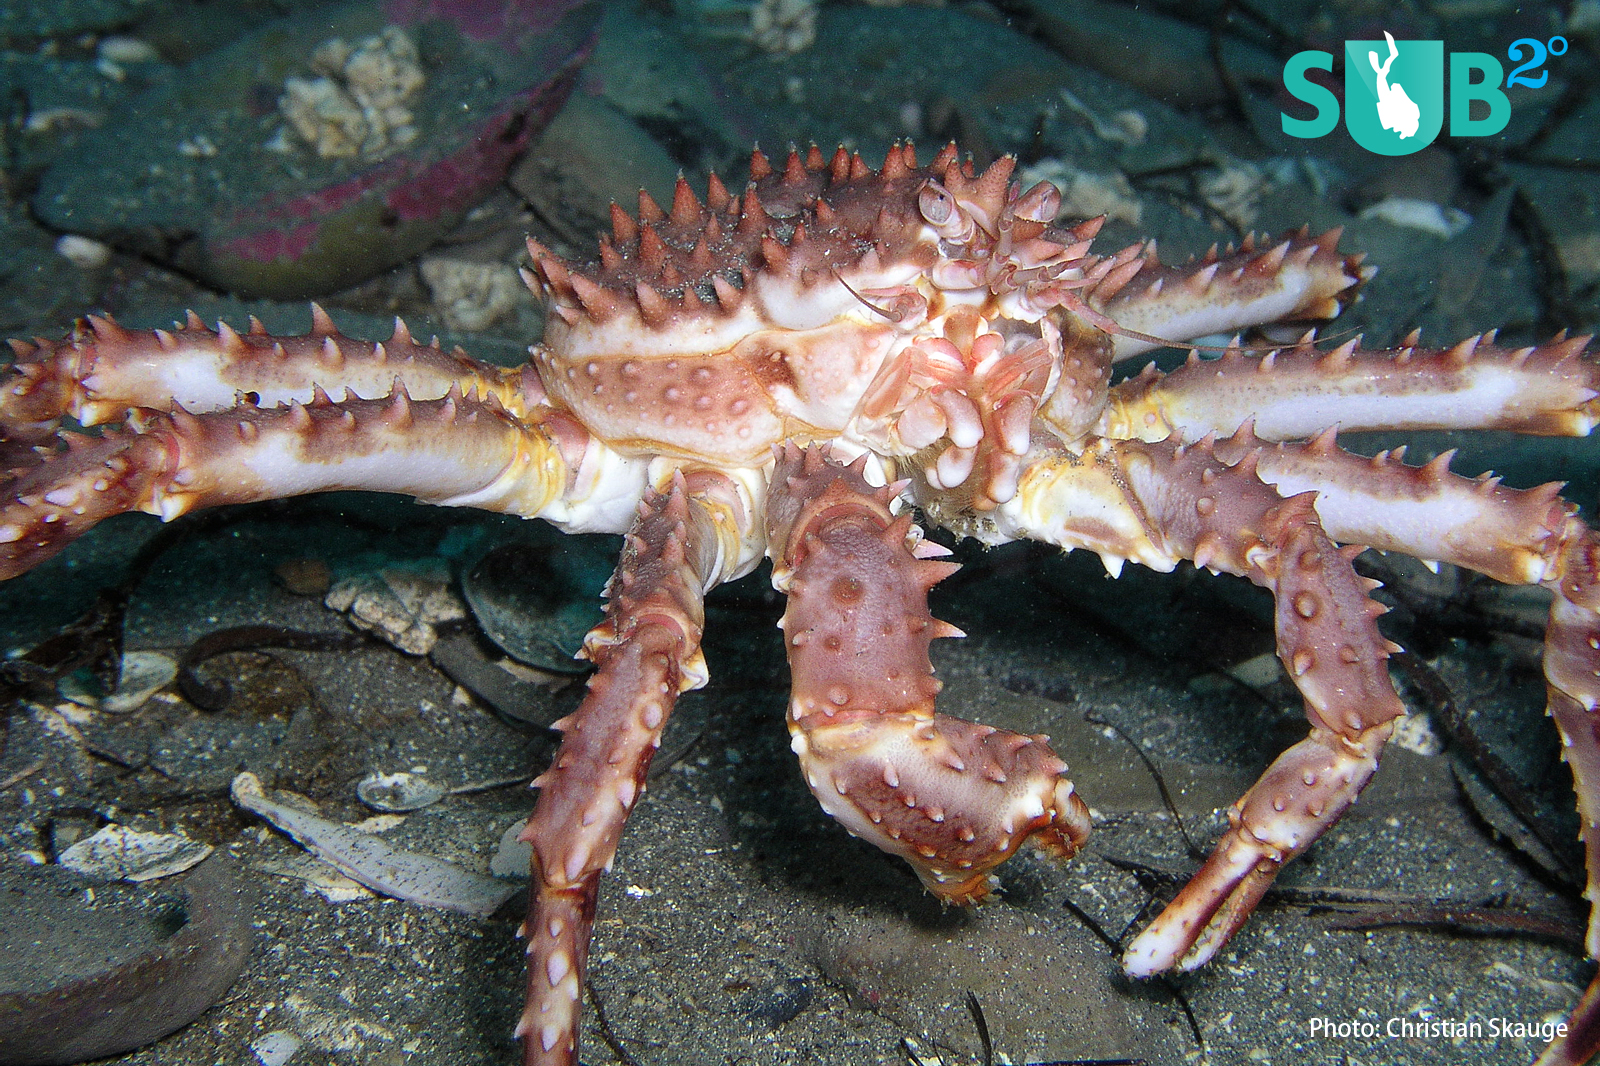 Juvenile king crabs may be mistaken for adult stone crabs (Lithodes maja), but the rostrum is different.